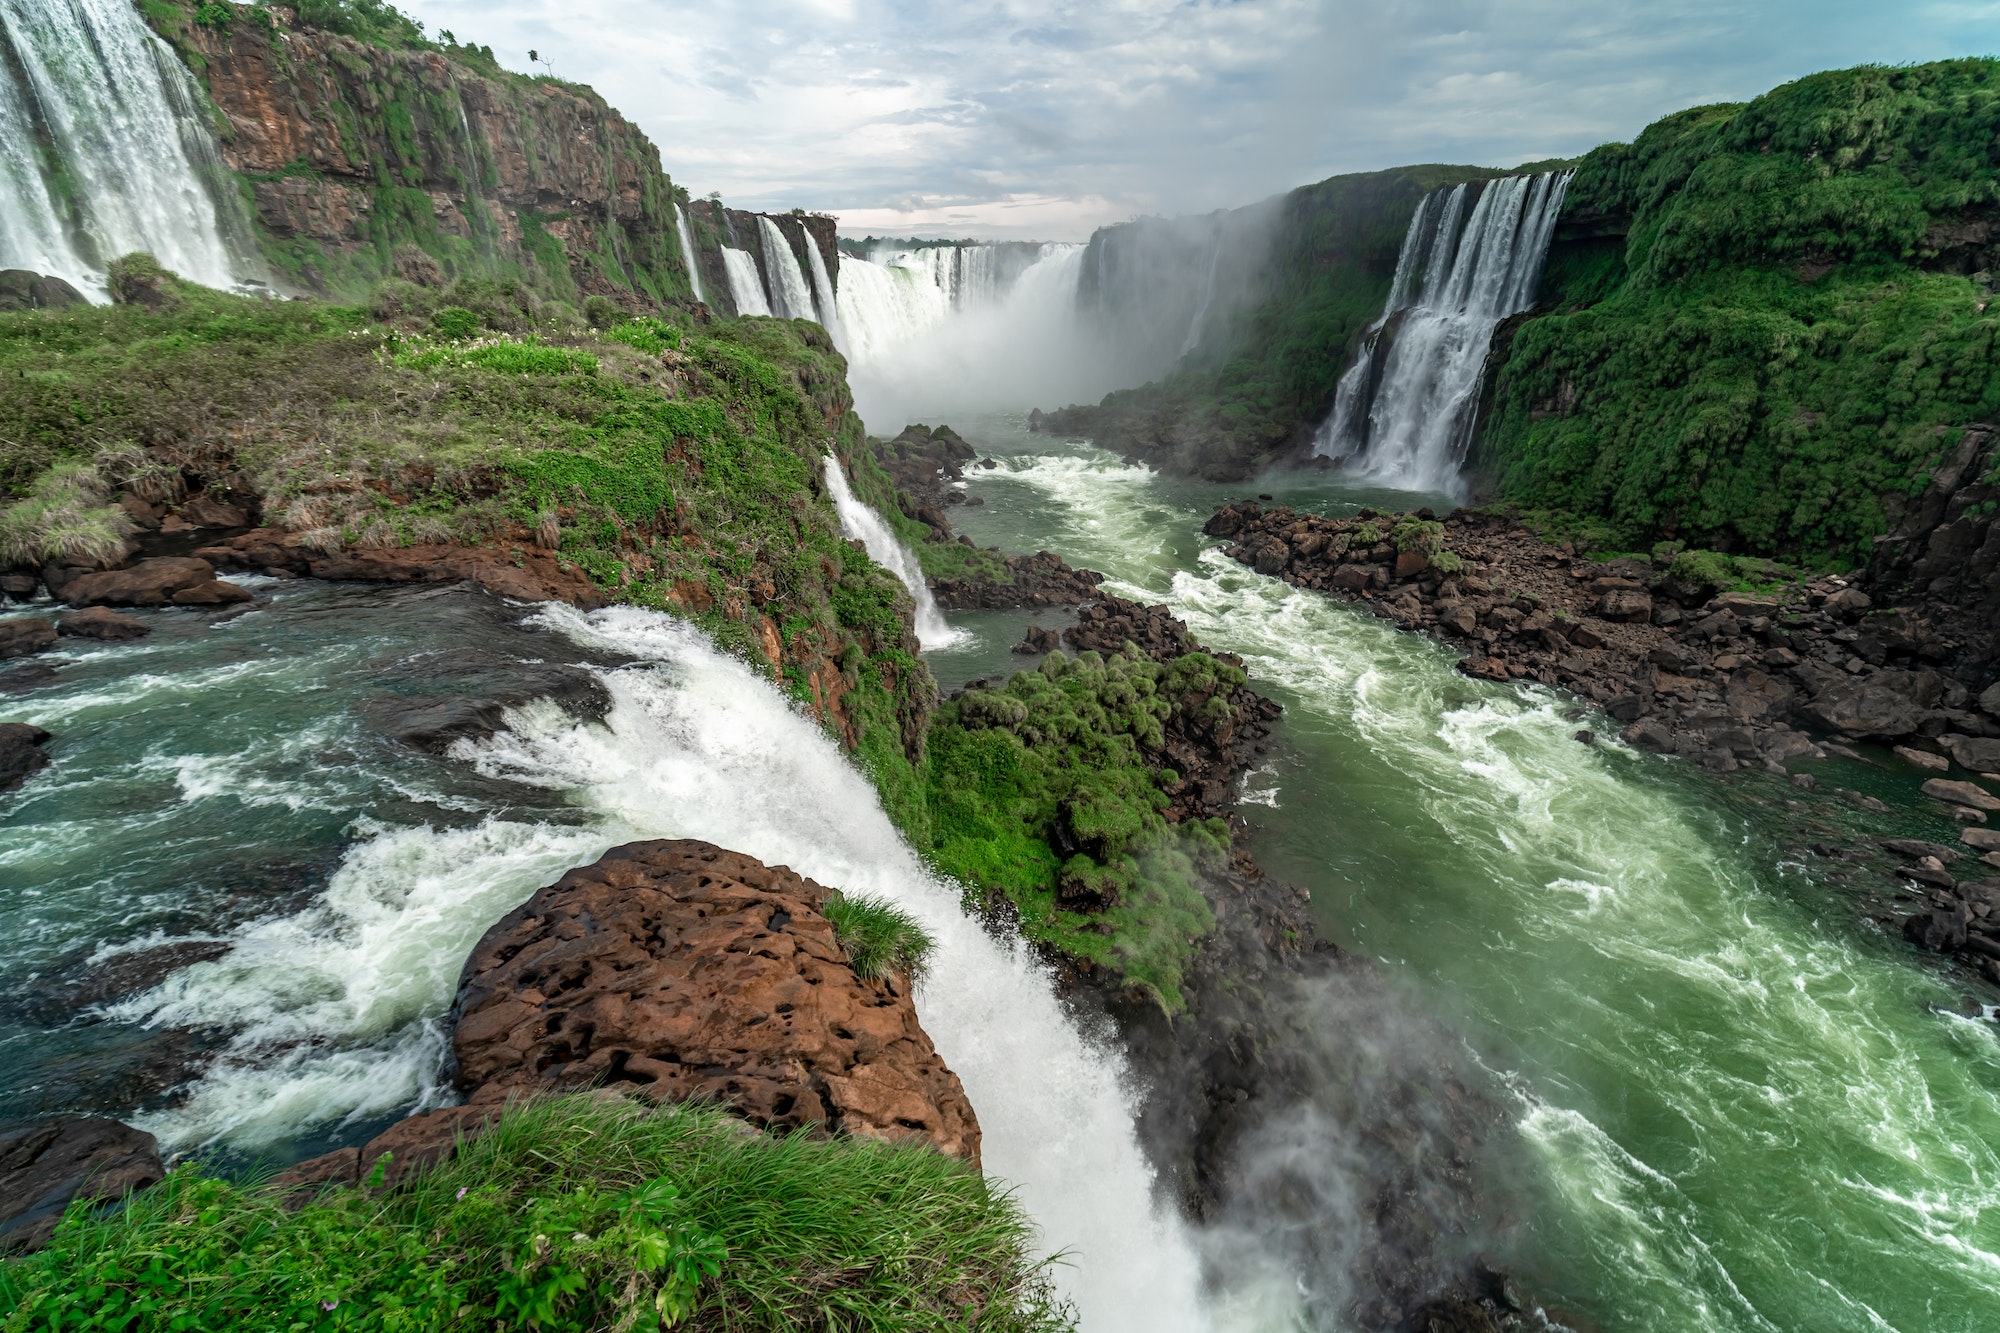 Iguazu Falls on the border of Brazil and Argentina in South America